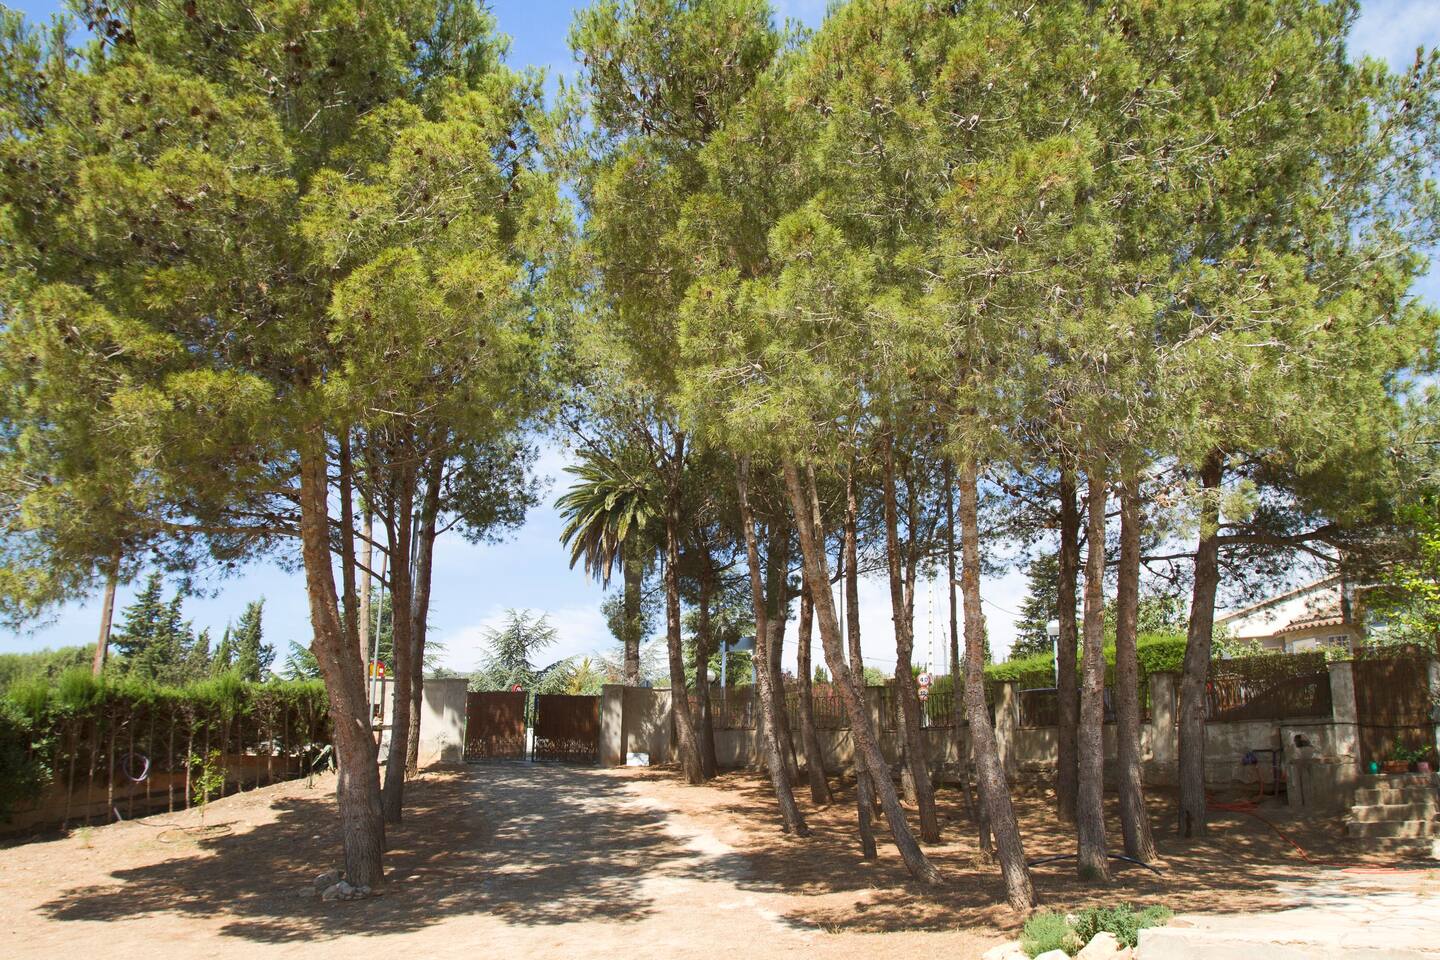 The house is surrounded by pine, olive, fig, and herbs.